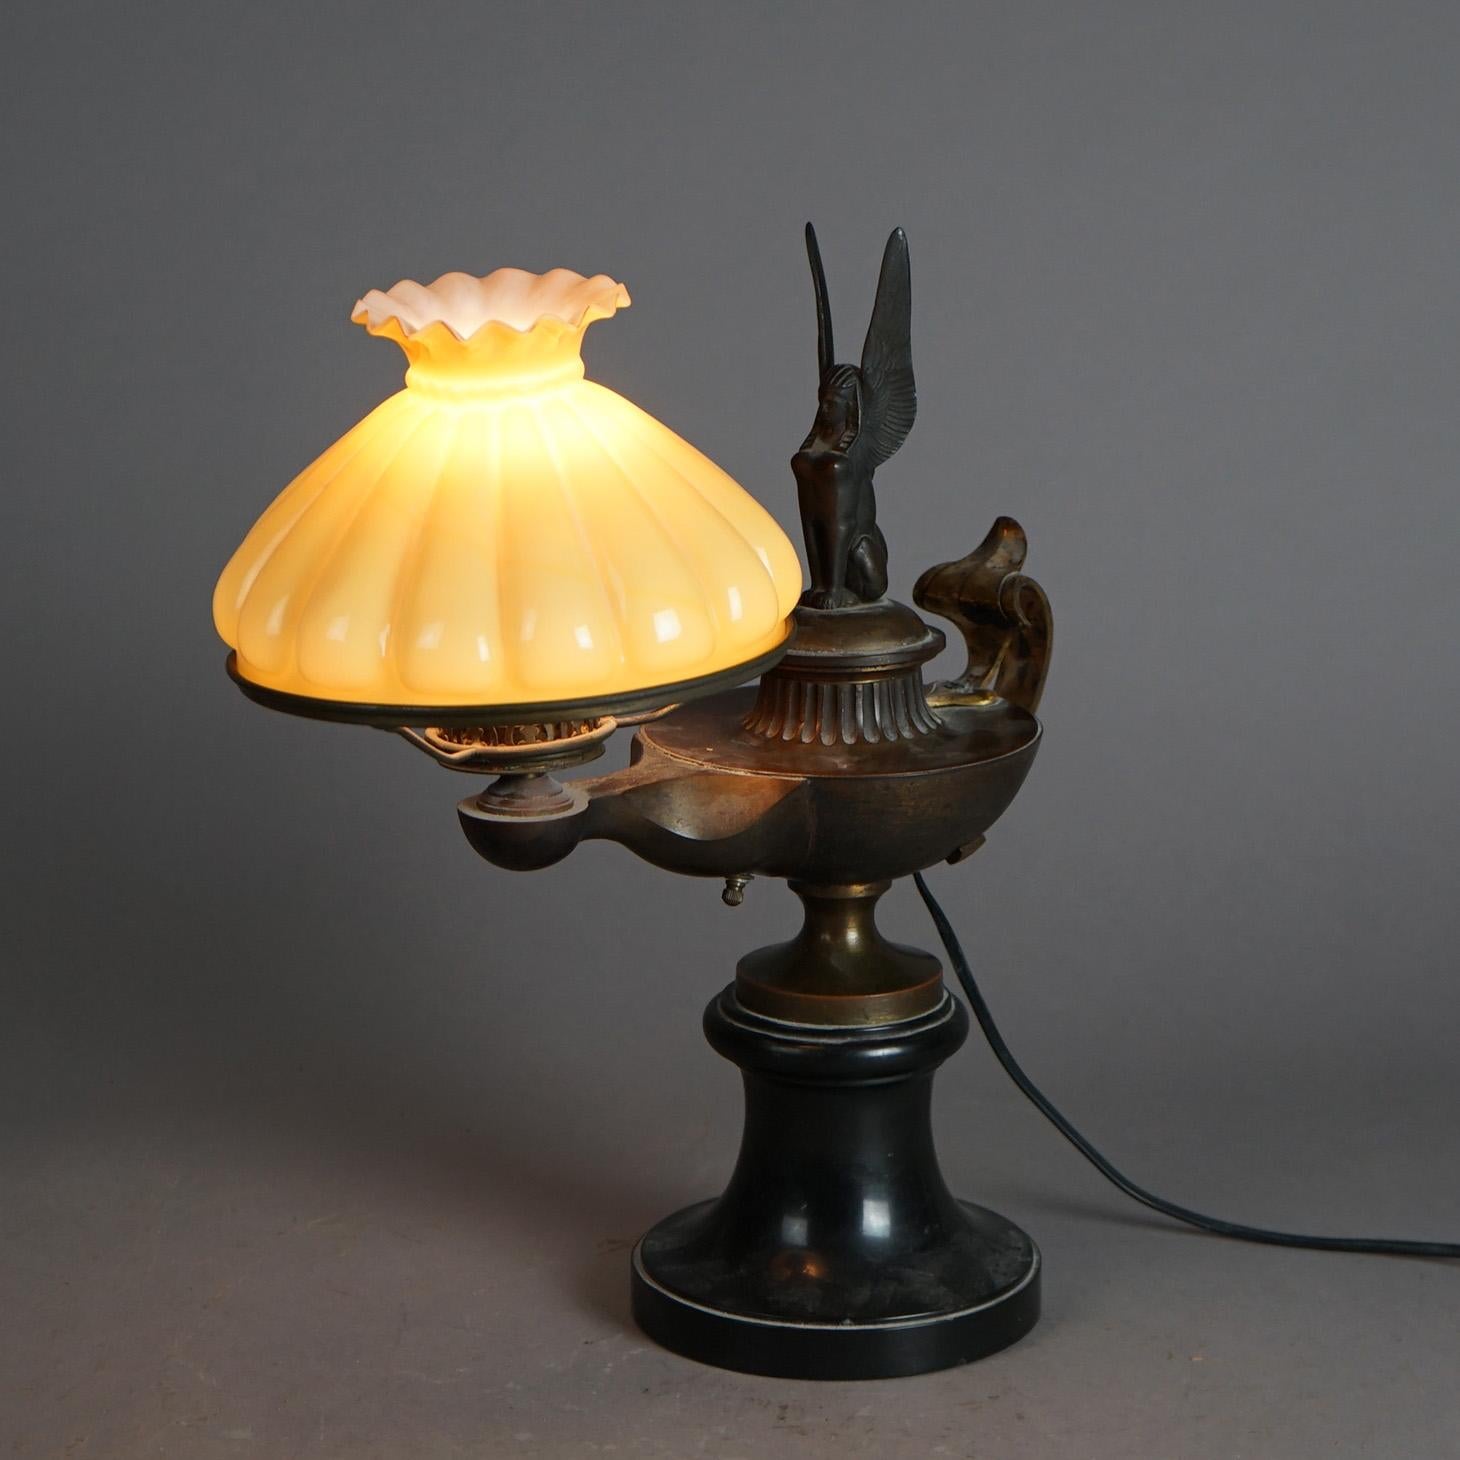 Antique Egyptian Revival Aladdin Form Figural Phoenix Desk Lamp, Early 20thC In Good Condition For Sale In Big Flats, NY